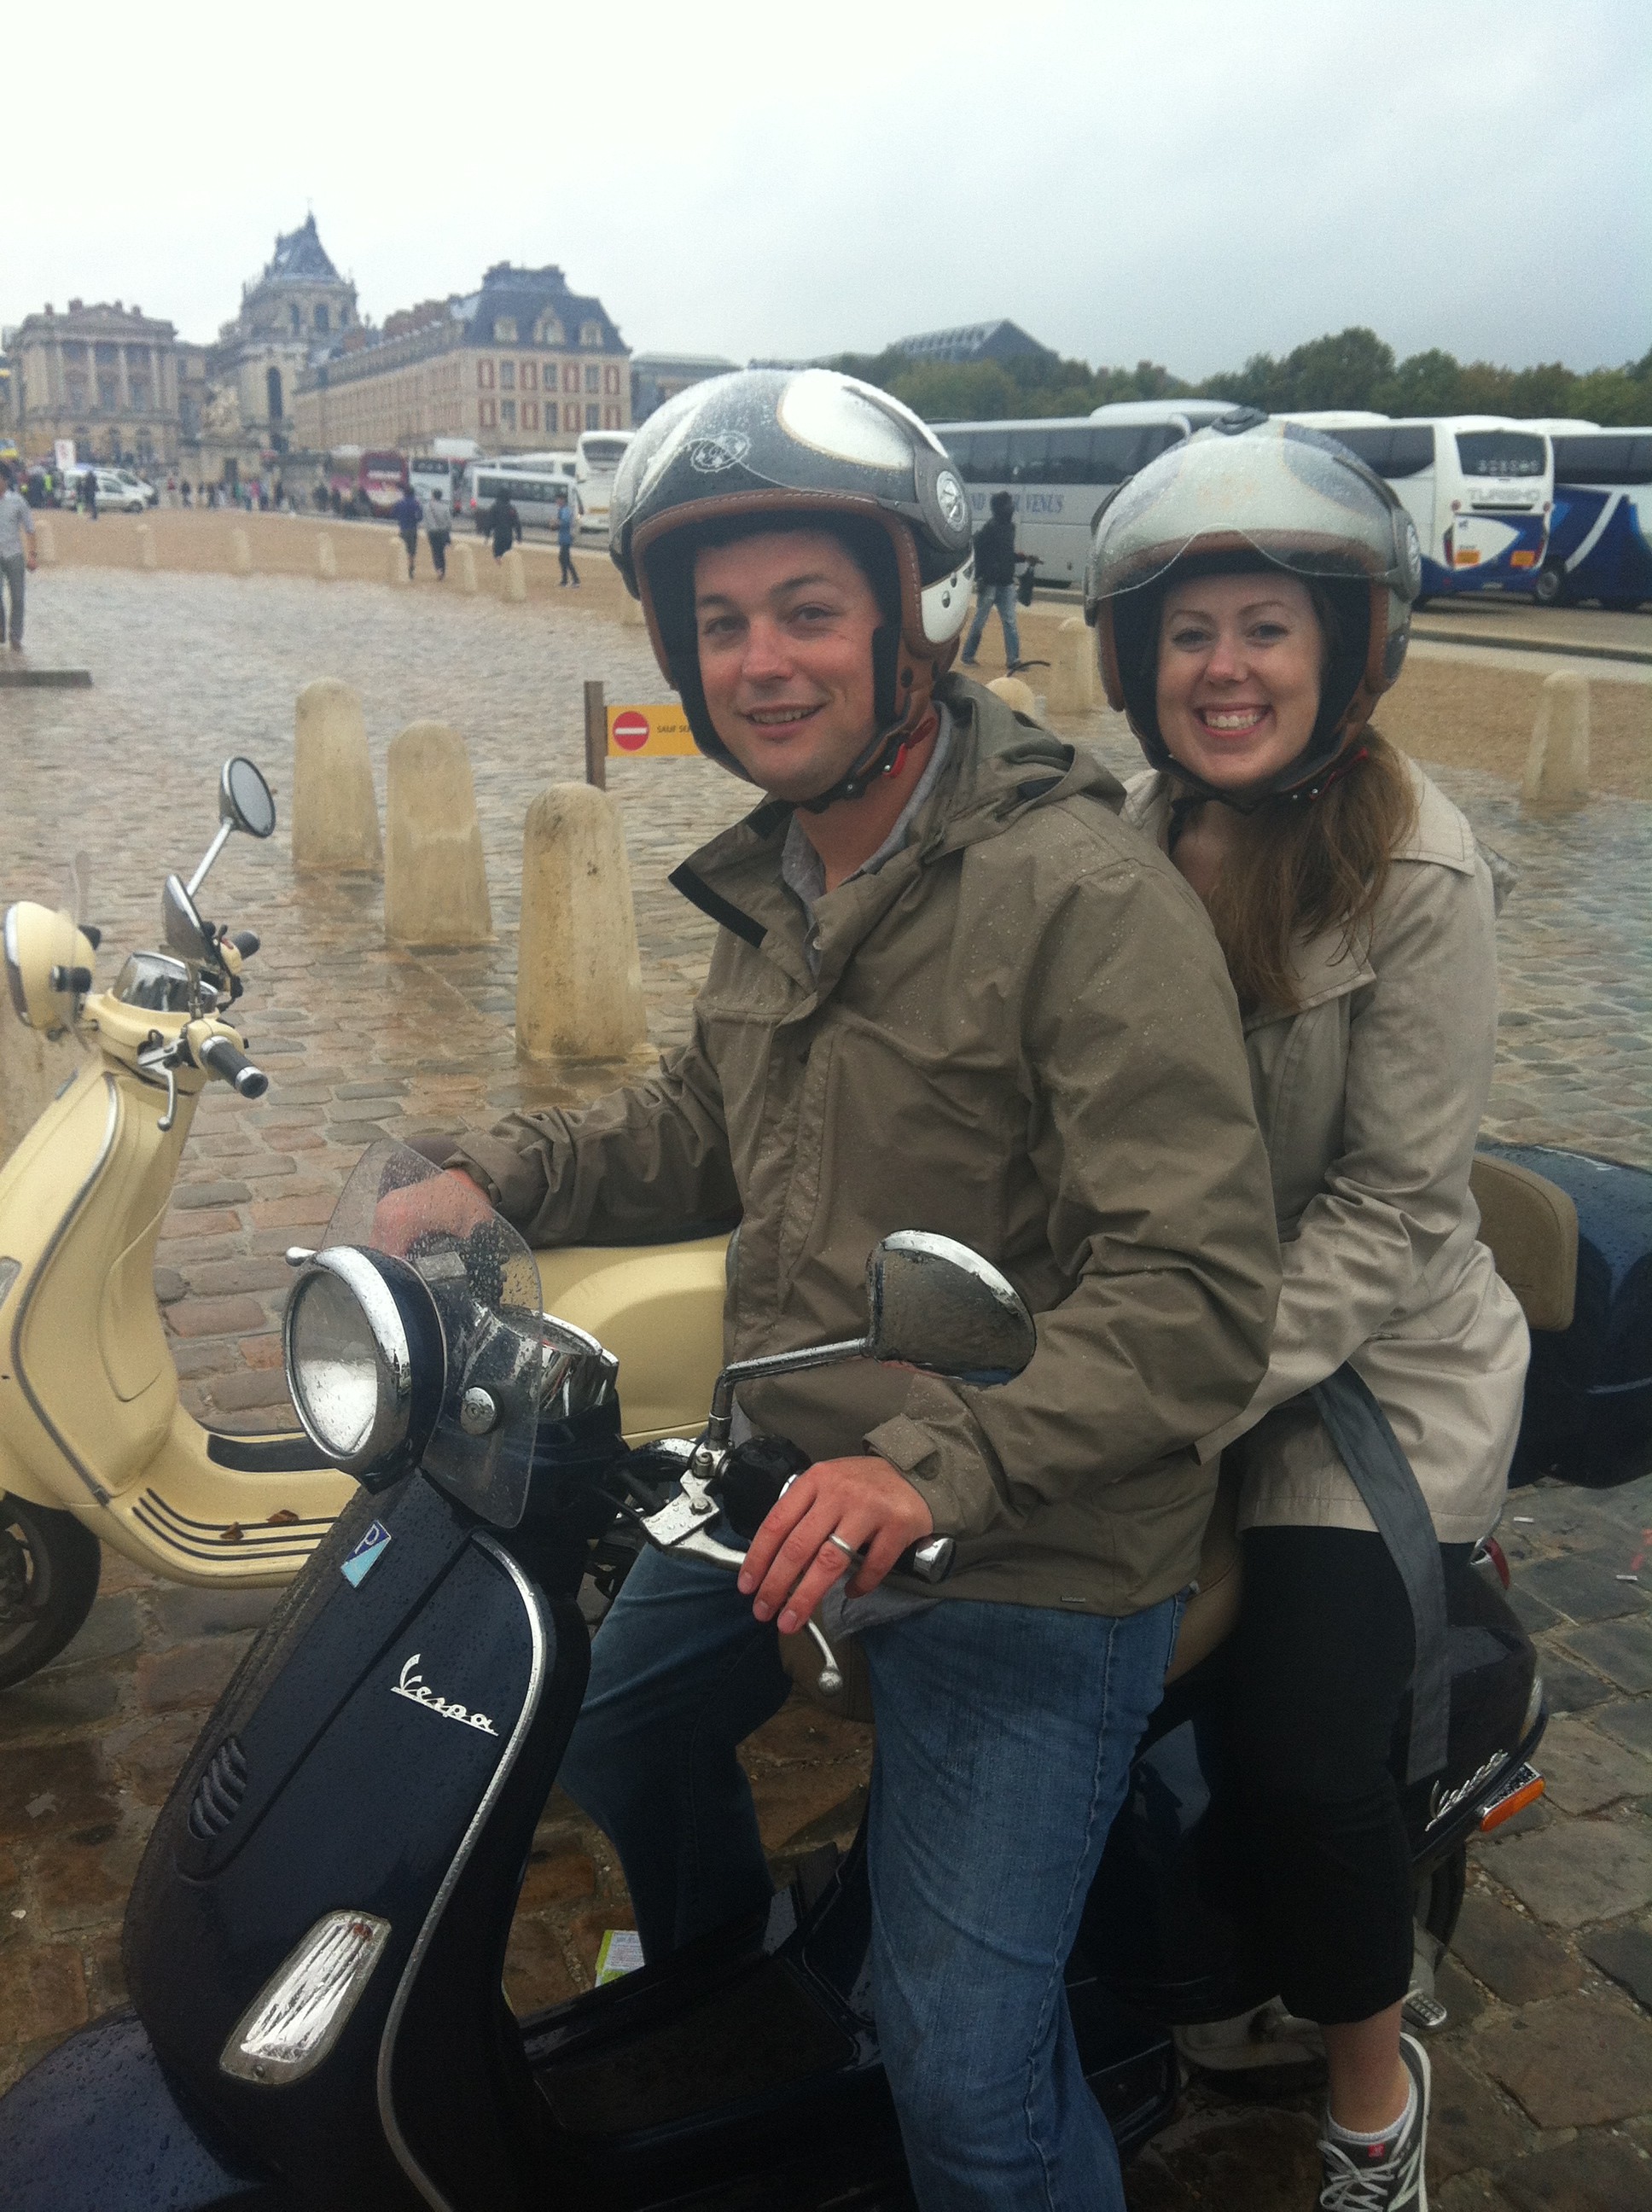 Adam and Melissa at Versailles Palace on their scooter after a Paris to Versailles ride.